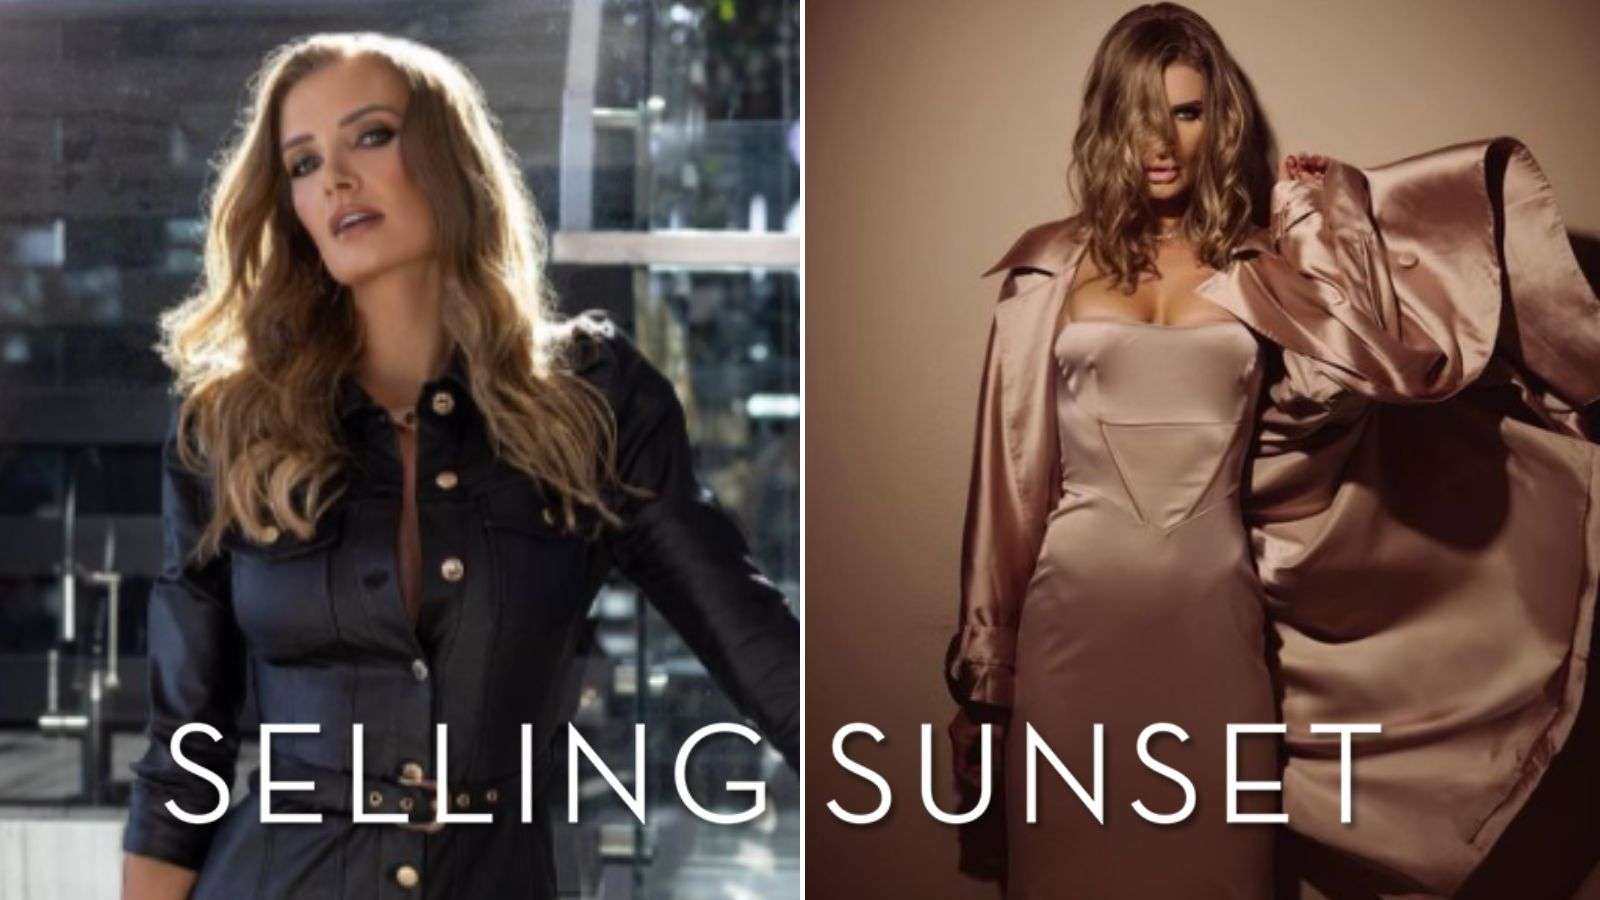 Nicole Young from Selling Sunset Season 6